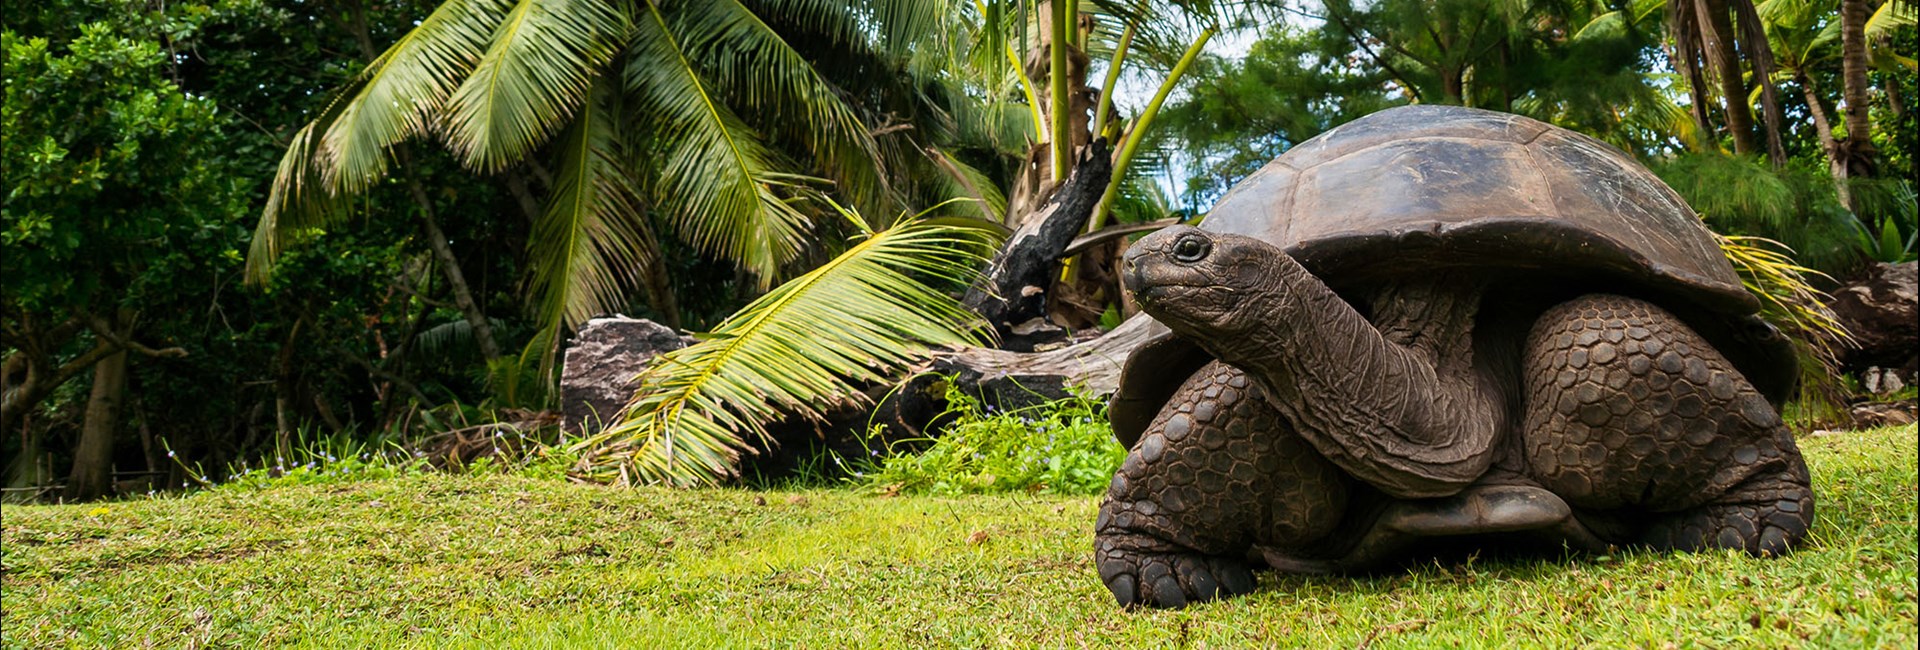 Aldabra Giant Tortoise on the grass underneath tropical palm plants